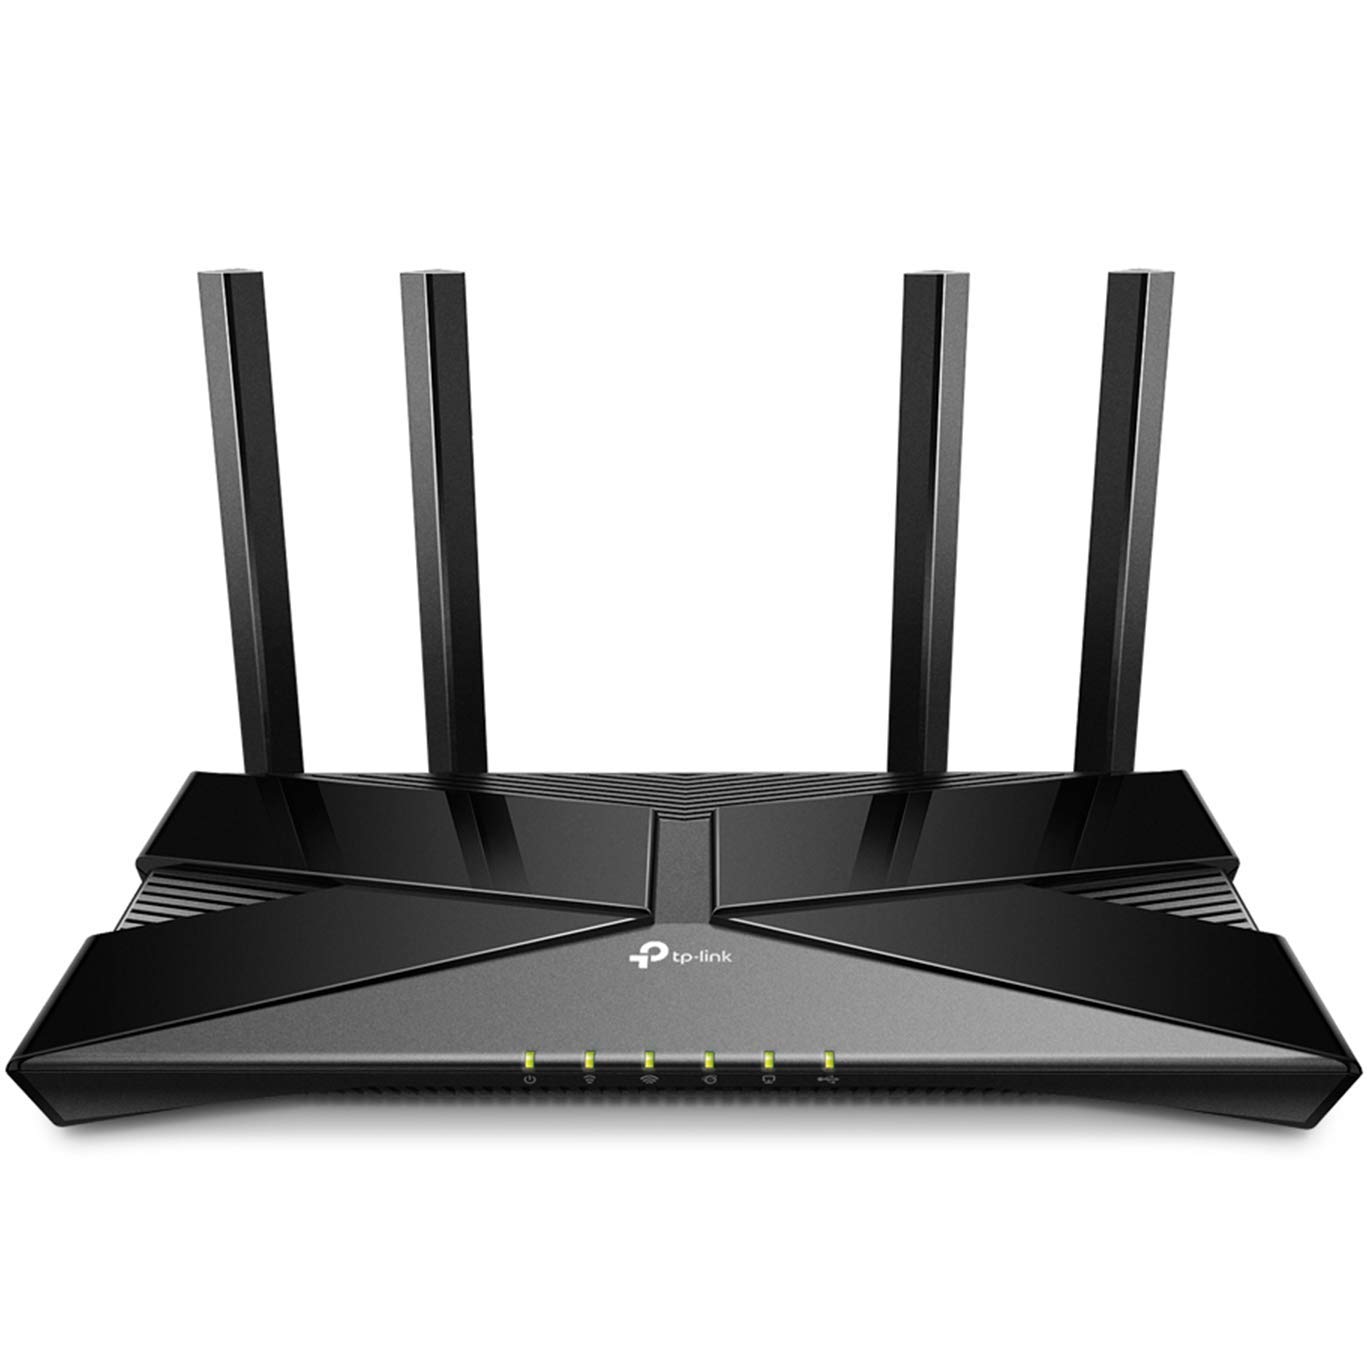 TP-Link Smart WiFi 6 Router (Archer AX10) – 802.11ax Router, 4 Gigabit LAN Ports, Dual Band AX Router,Beamforming,OFDMA, MU-MIMO, Parental Controls, Works with Alexa